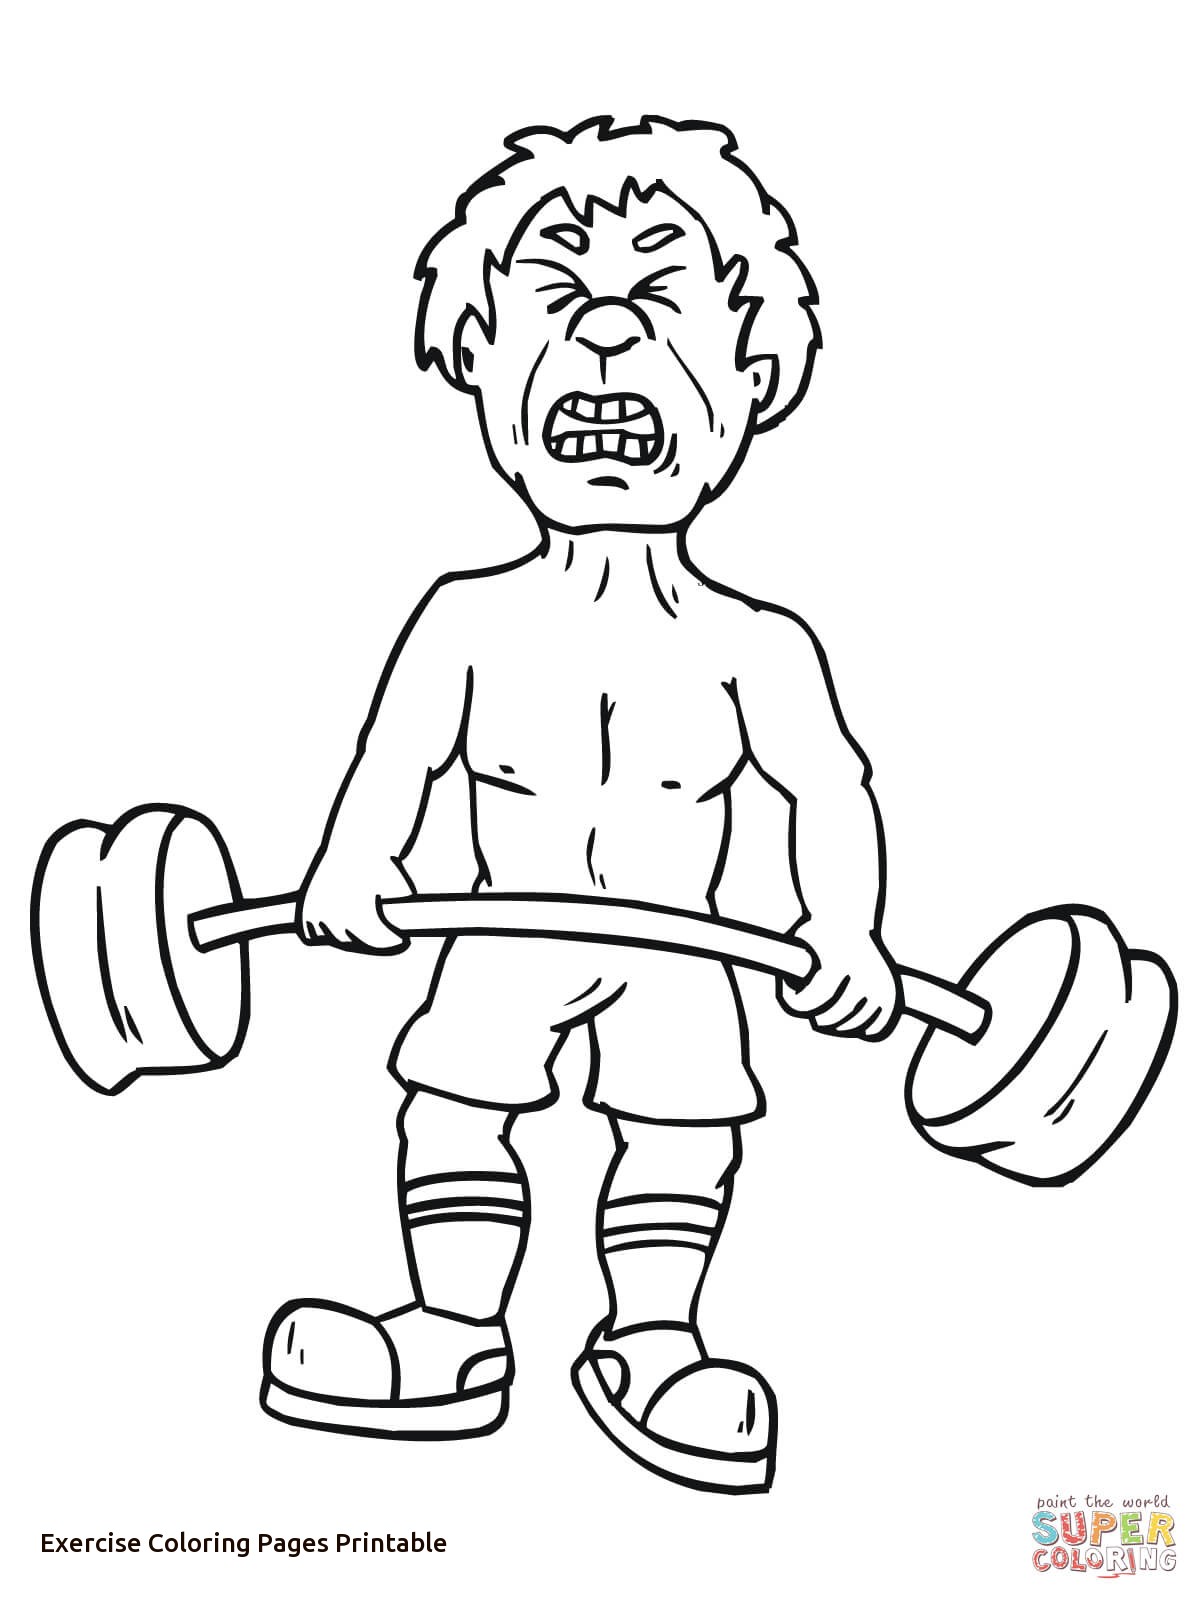 Physical Fitness Pages Coloring Pages 37518 | The Best Porn Website